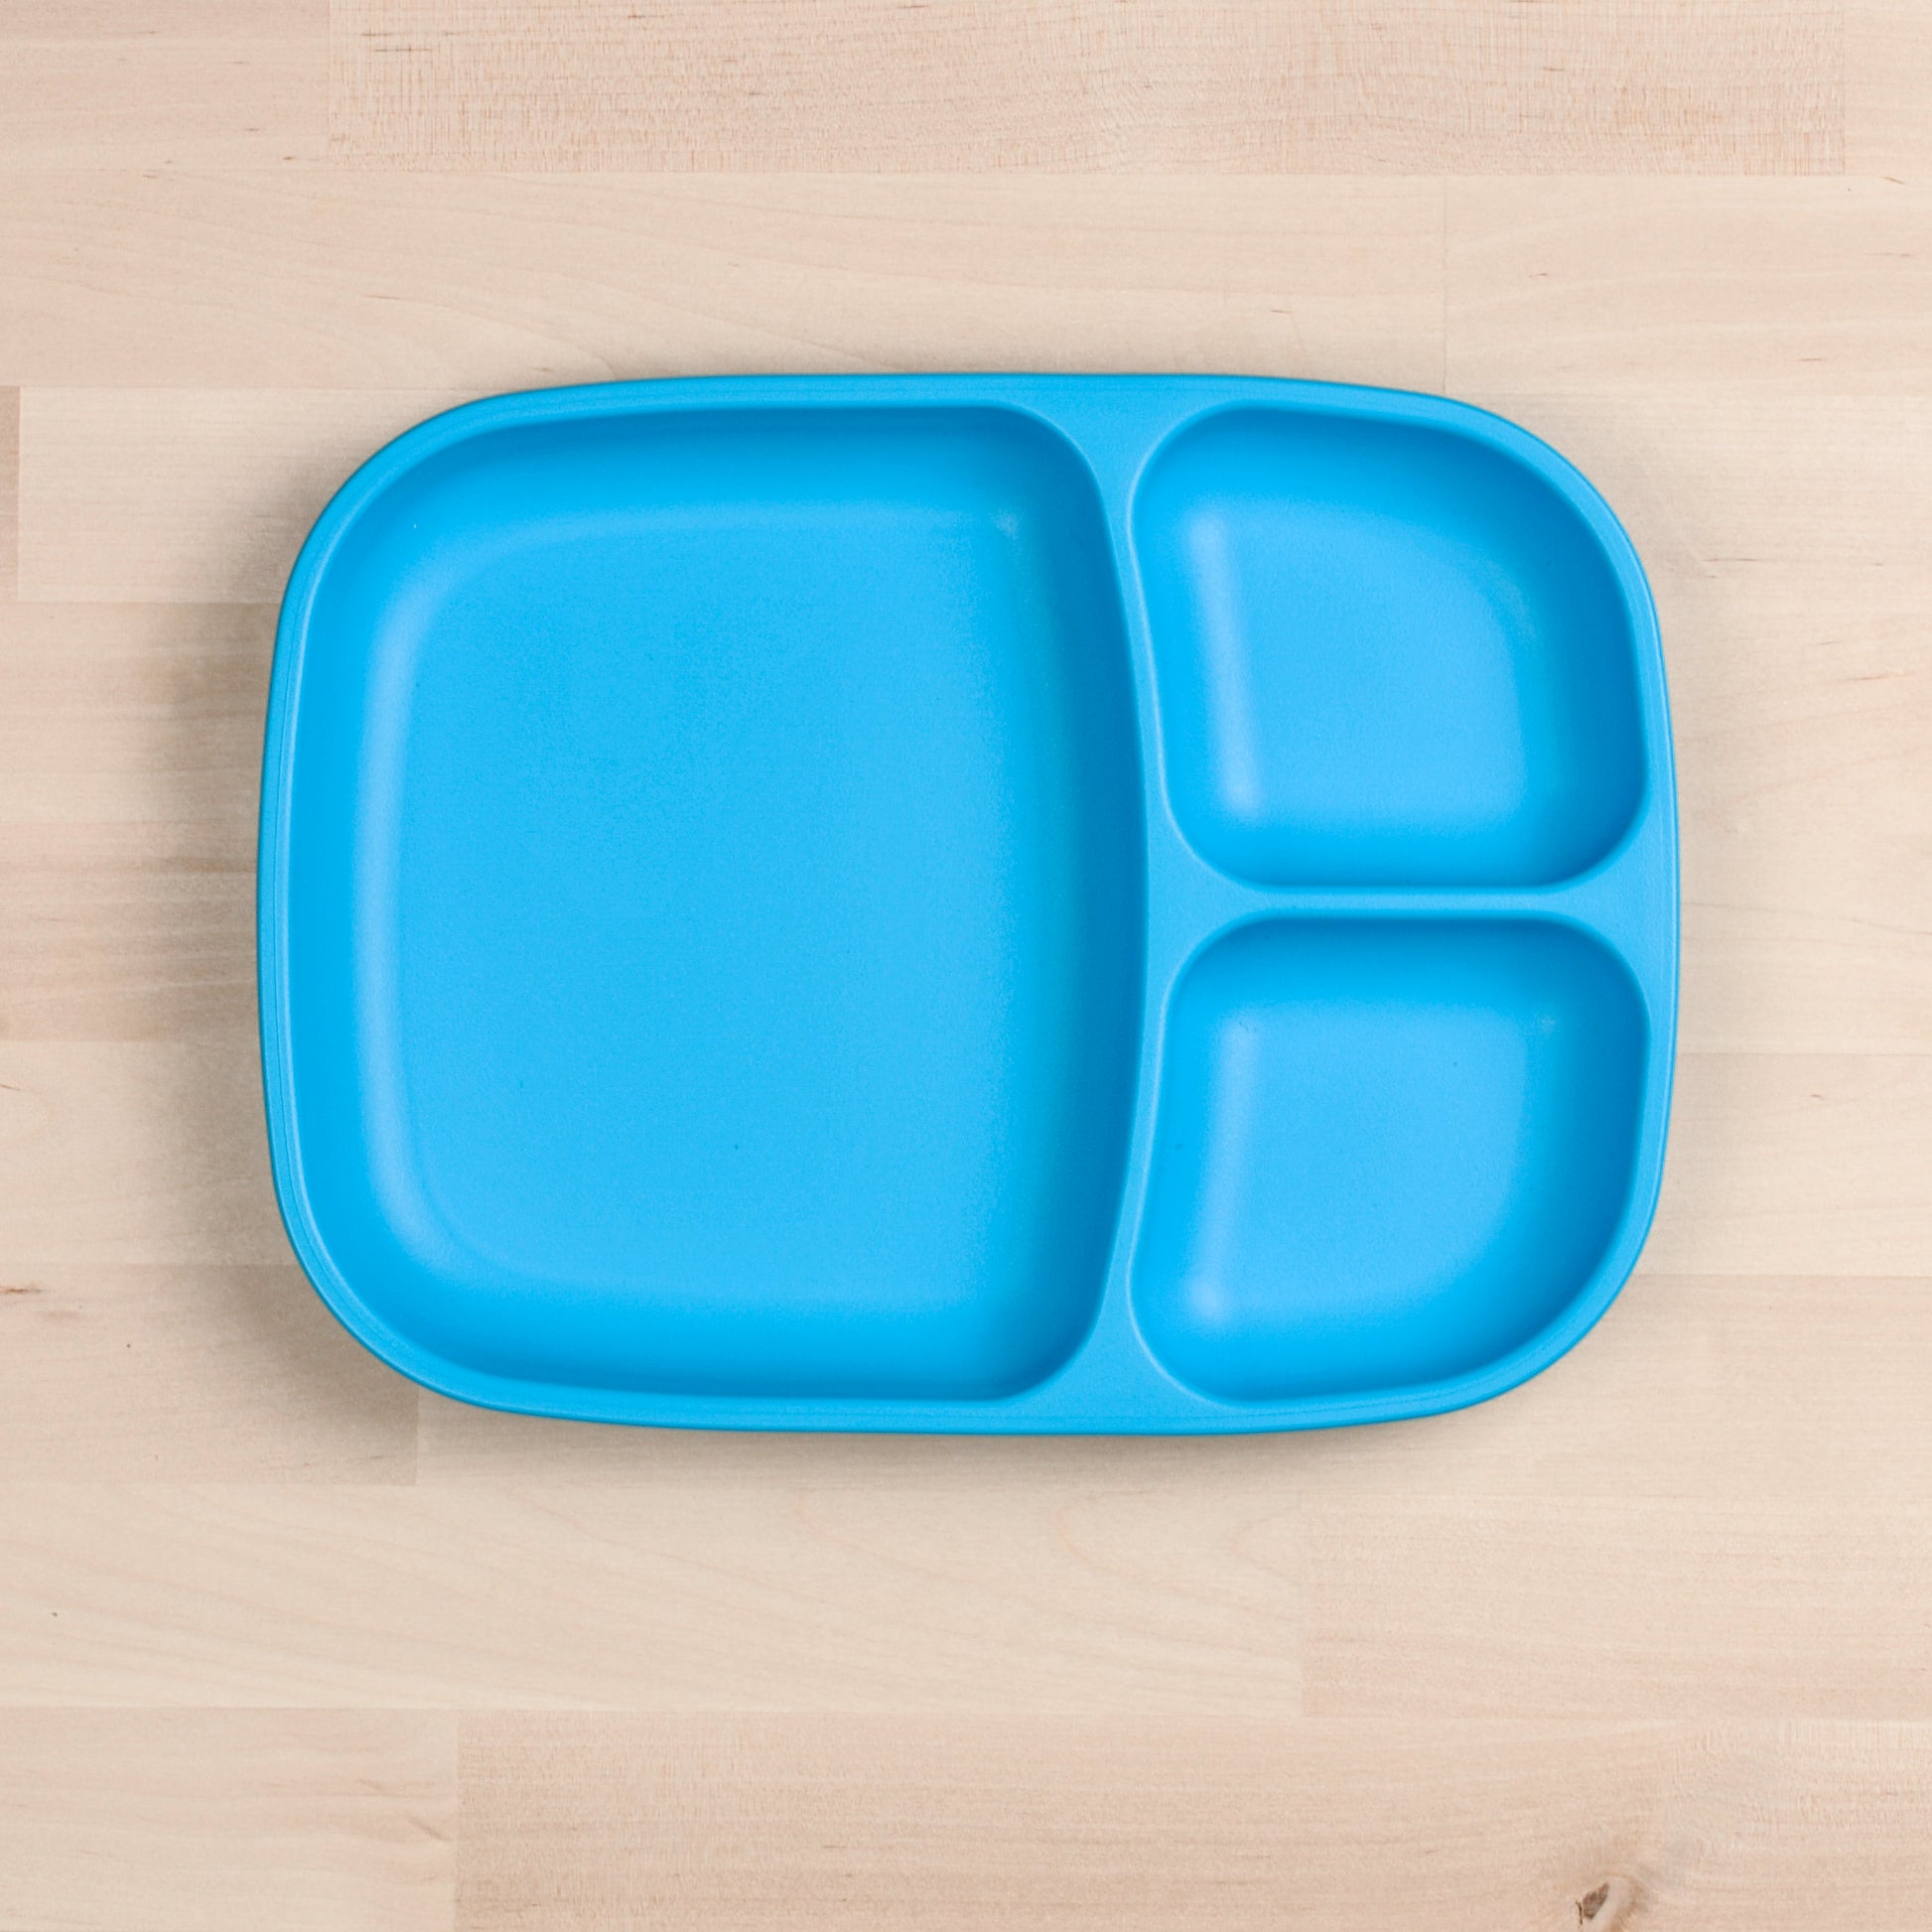 Re-Play Divided Tray in Sky Blue from Bear & Moo